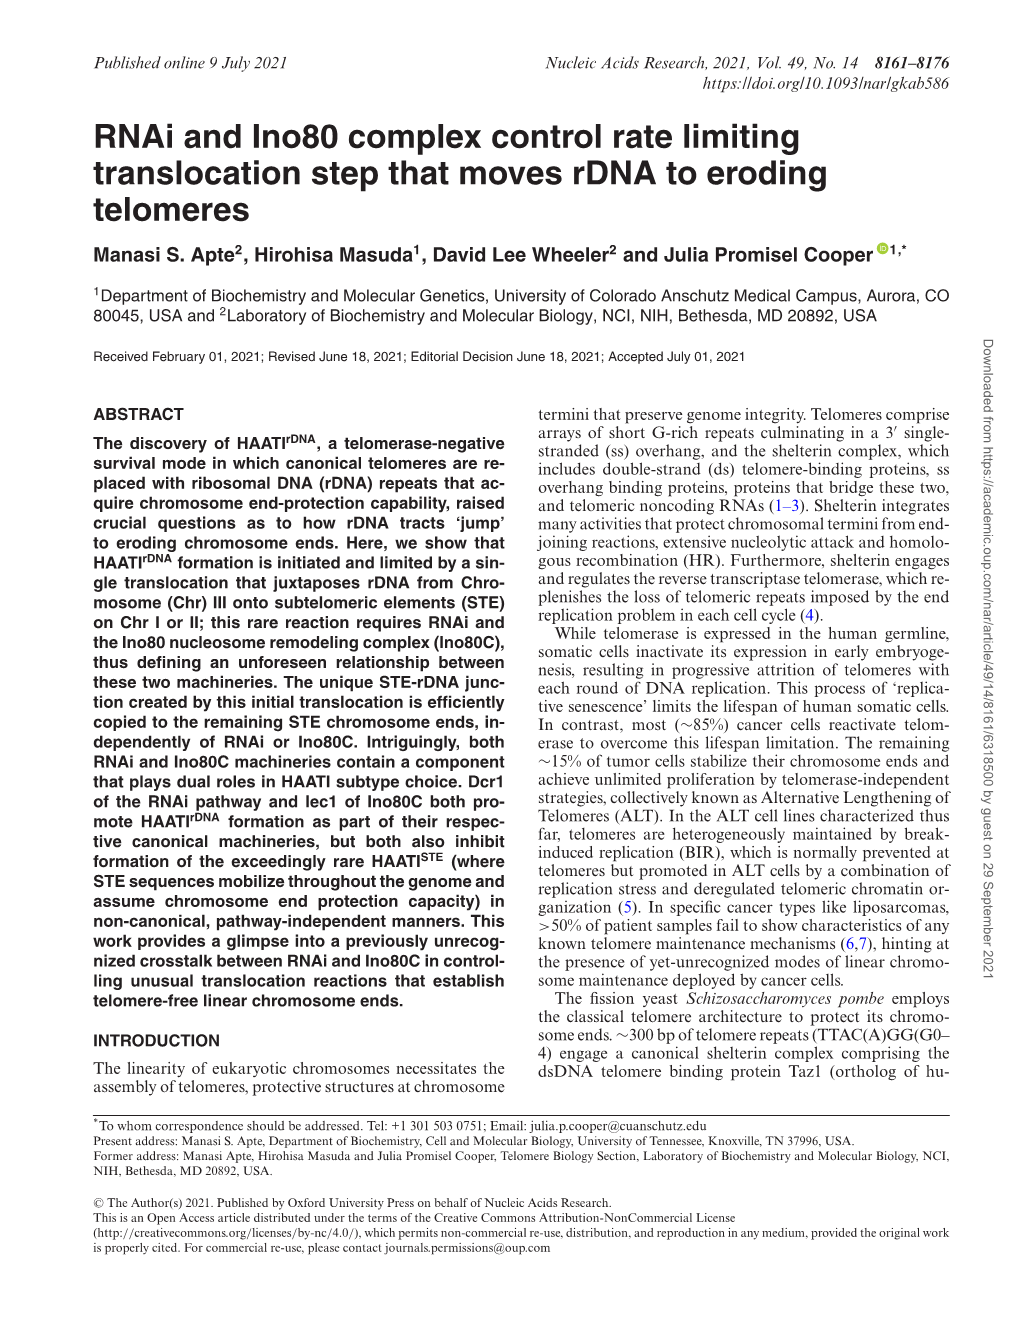 Rnai and Ino80 Complex Control Rate Limiting Translocation Step That Moves Rdna to Eroding Telomeres Manasi S